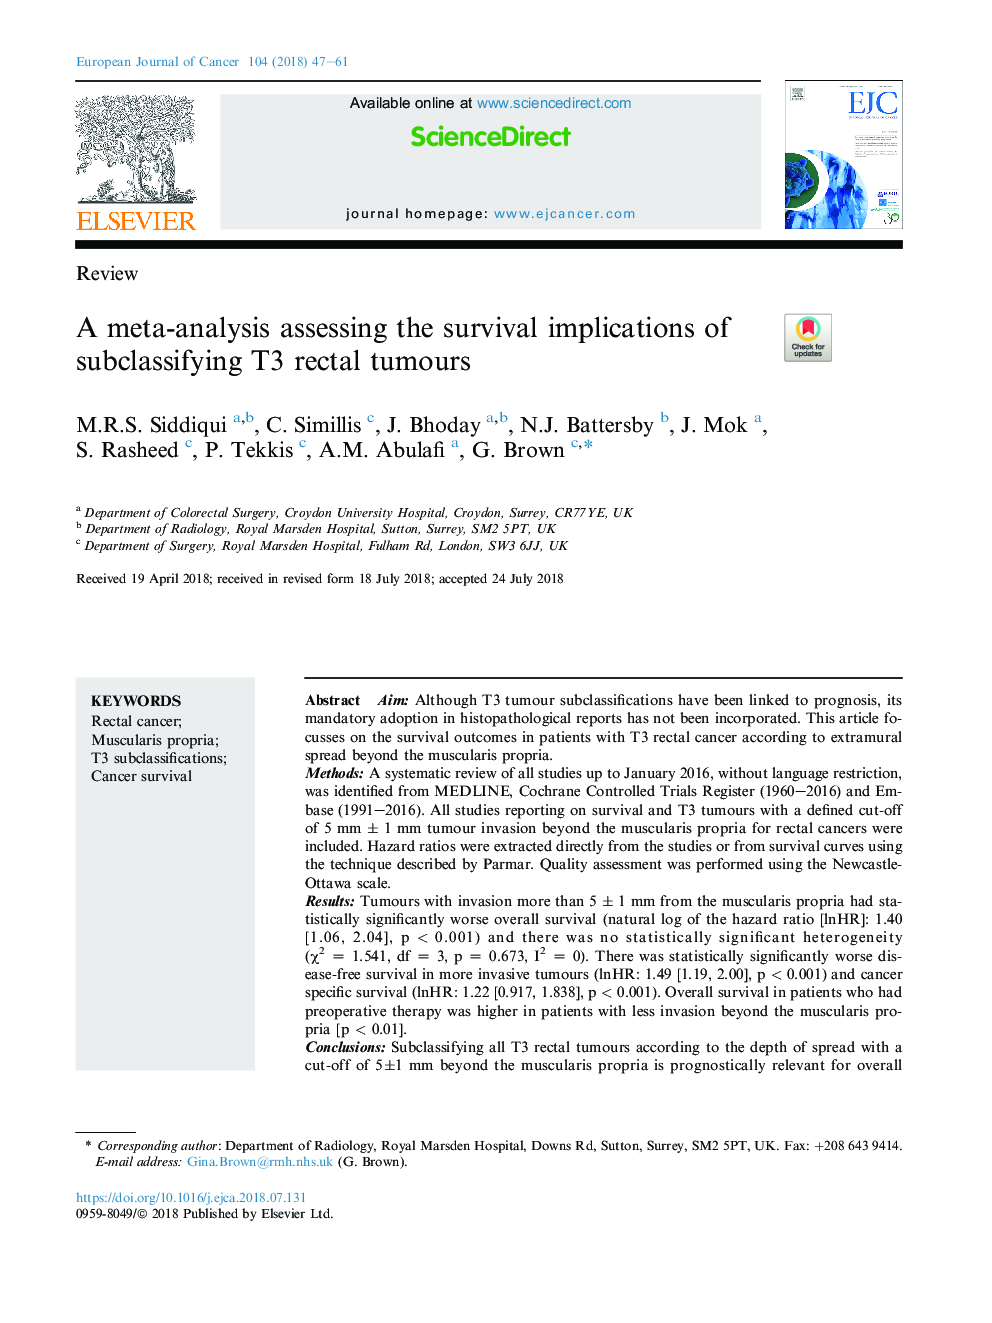 A meta-analysis assessing the survival implications of subclassifying T3 rectal tumours